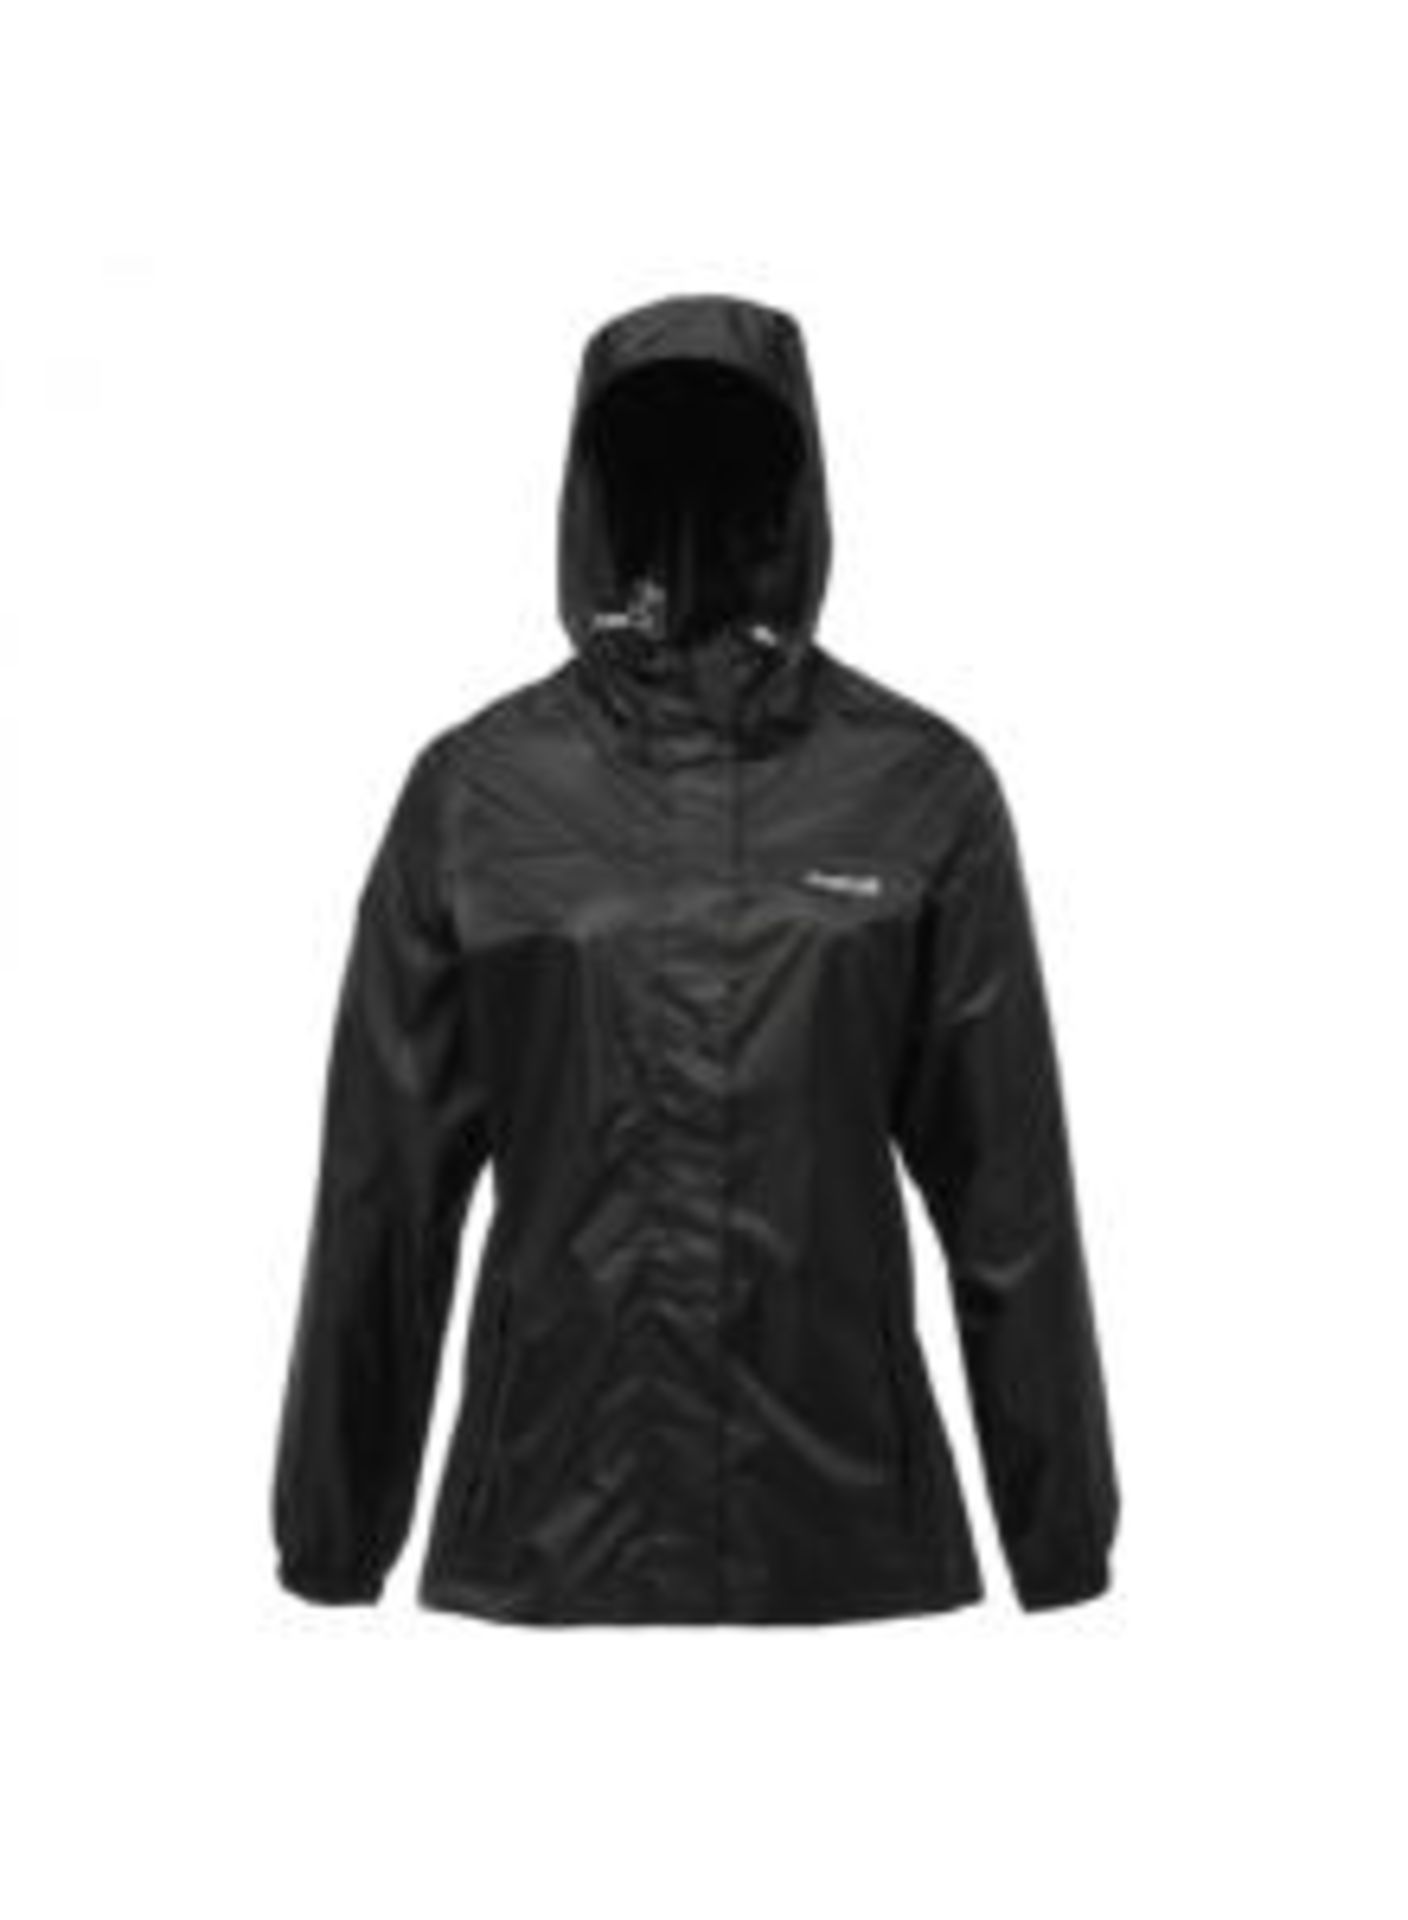 V Waterproof Cagoule In Carry Case Size S